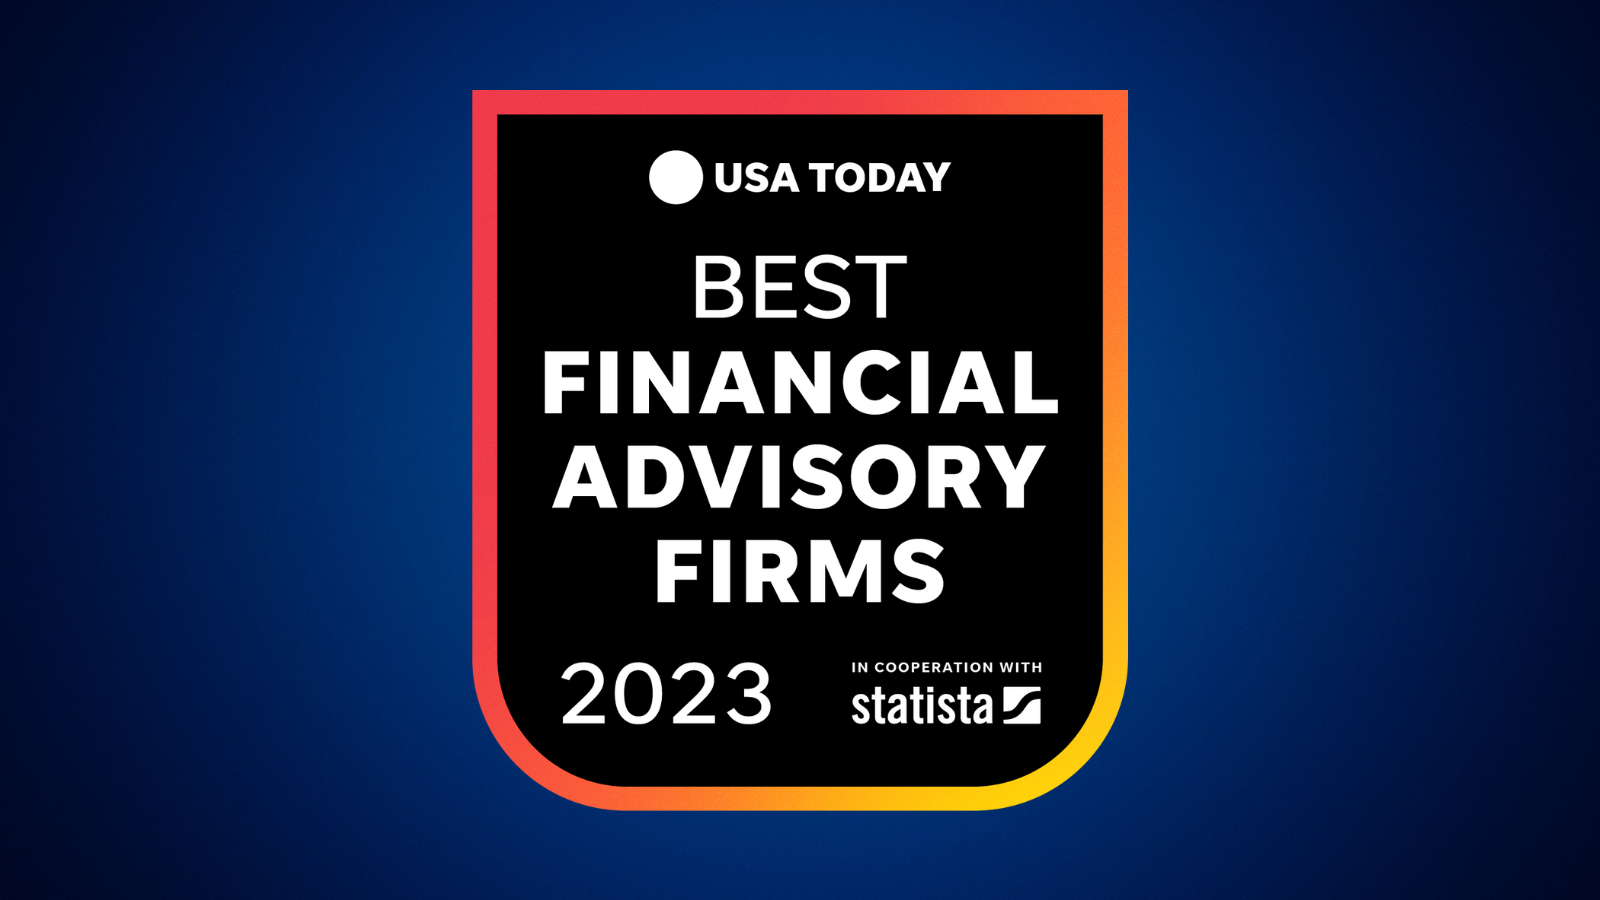 graphic of usa today's 2023 best financial advisory firms